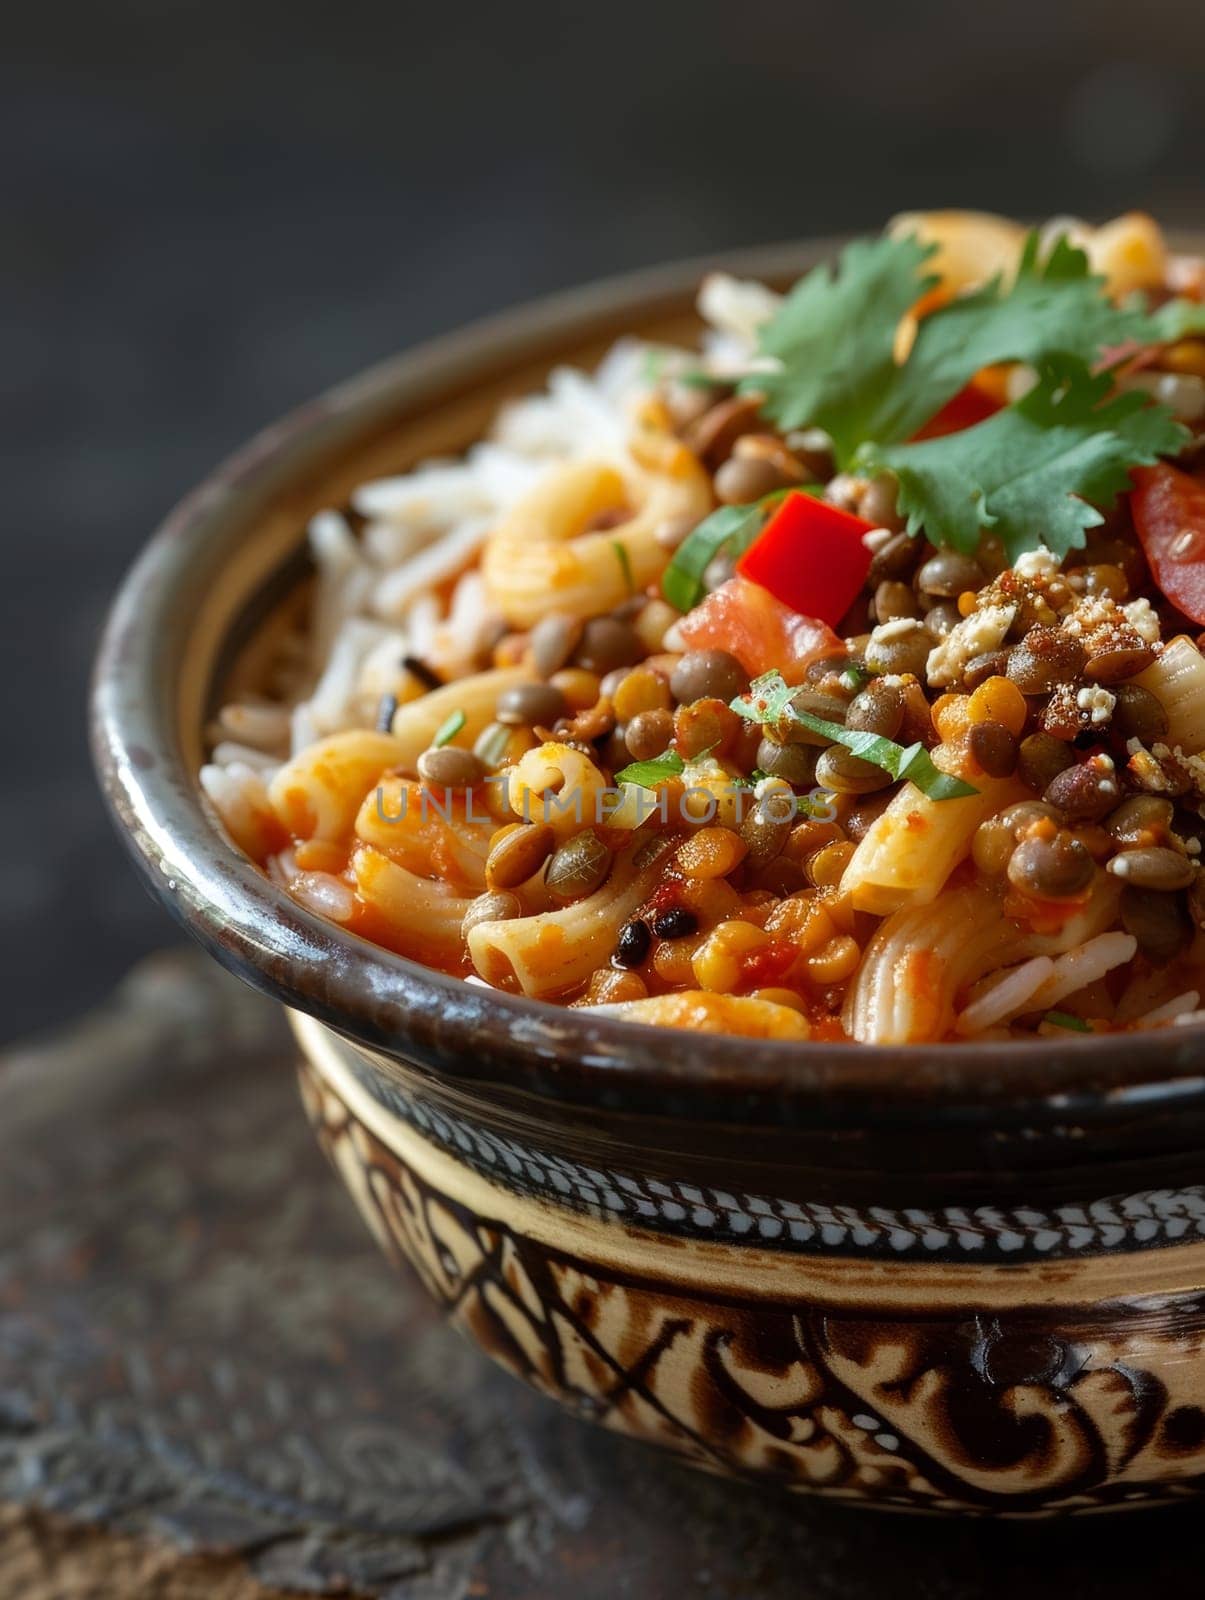 Egyptian koshari, a hearty dish with layers of rice, macaroni, lentils, and a spicy tomato sauce, representing the flavors of Egypt